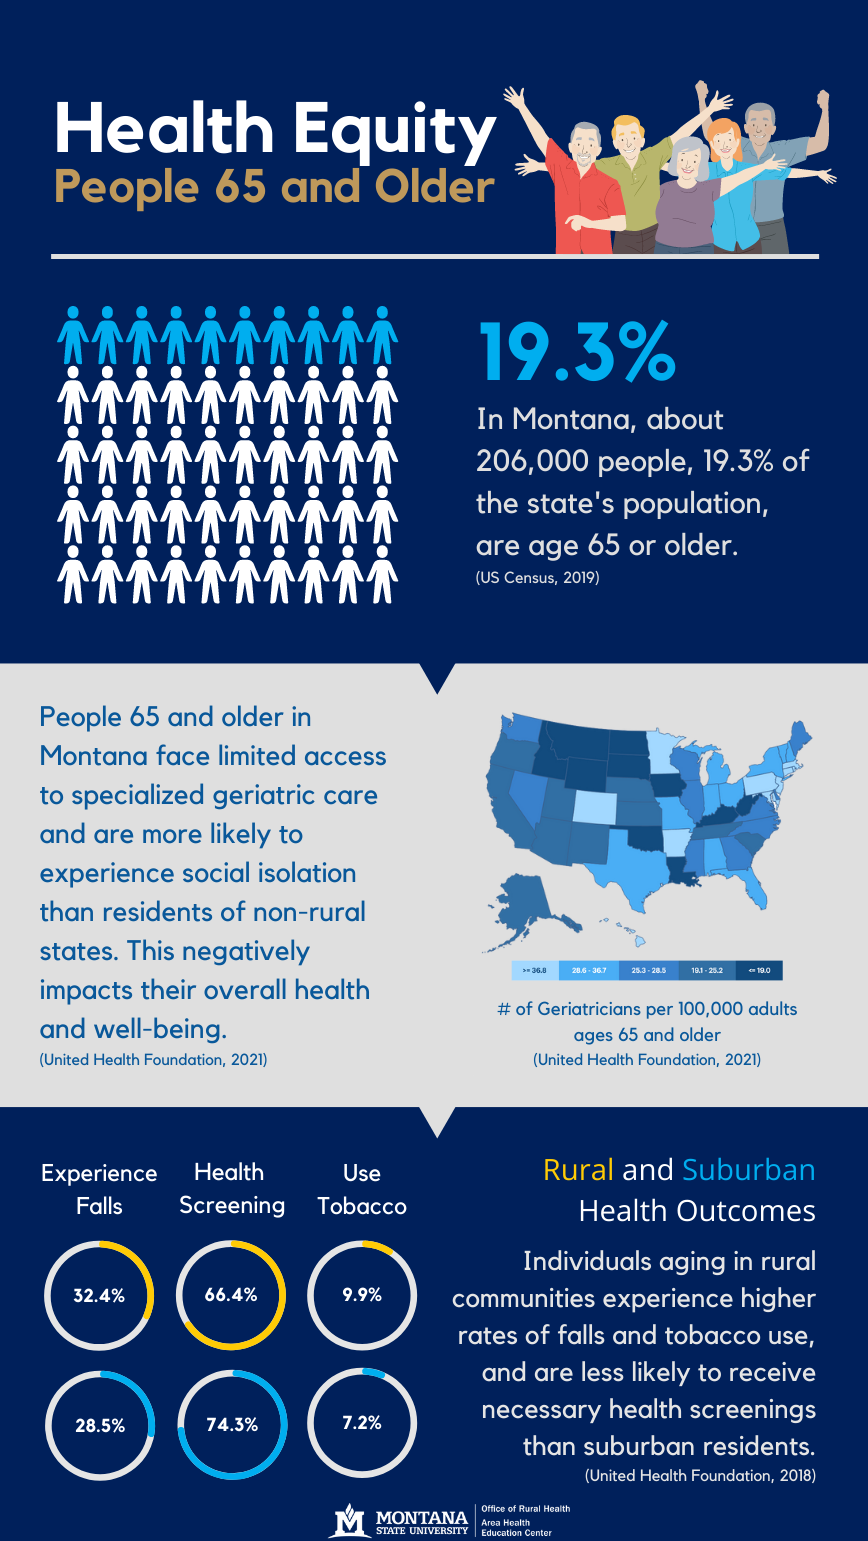 Health Equity - People 65 and Older. In Montana, about 206,000 people, 19.3% of the state's population, are age 65 or older. (US Census, 2019). People 65 and older in Montana face limited access to specialized geriatric care and are more likely to experience social isolation than residents of non-rural states. This negatively impacts their overall health and well-being. (United Health Foundation, 2021). Map of number of geriatricians per 100,000 adults ages 65 and older (United Health Foundation, 2021). Rural and Suburban Health Outcomes - Individuals aging in rural communities experience higher rates of falls and tobacco use, and are less likely to receive necessary health screenings than suburban residents. (United Health Foundation, 2018). In rural areas: 32.4% of individuals experience falls, receive health screening, and use tobacco. In urban areas, 28.5% experience falls, 74.3% receive health screenings, and 7.2% use tobacco. 